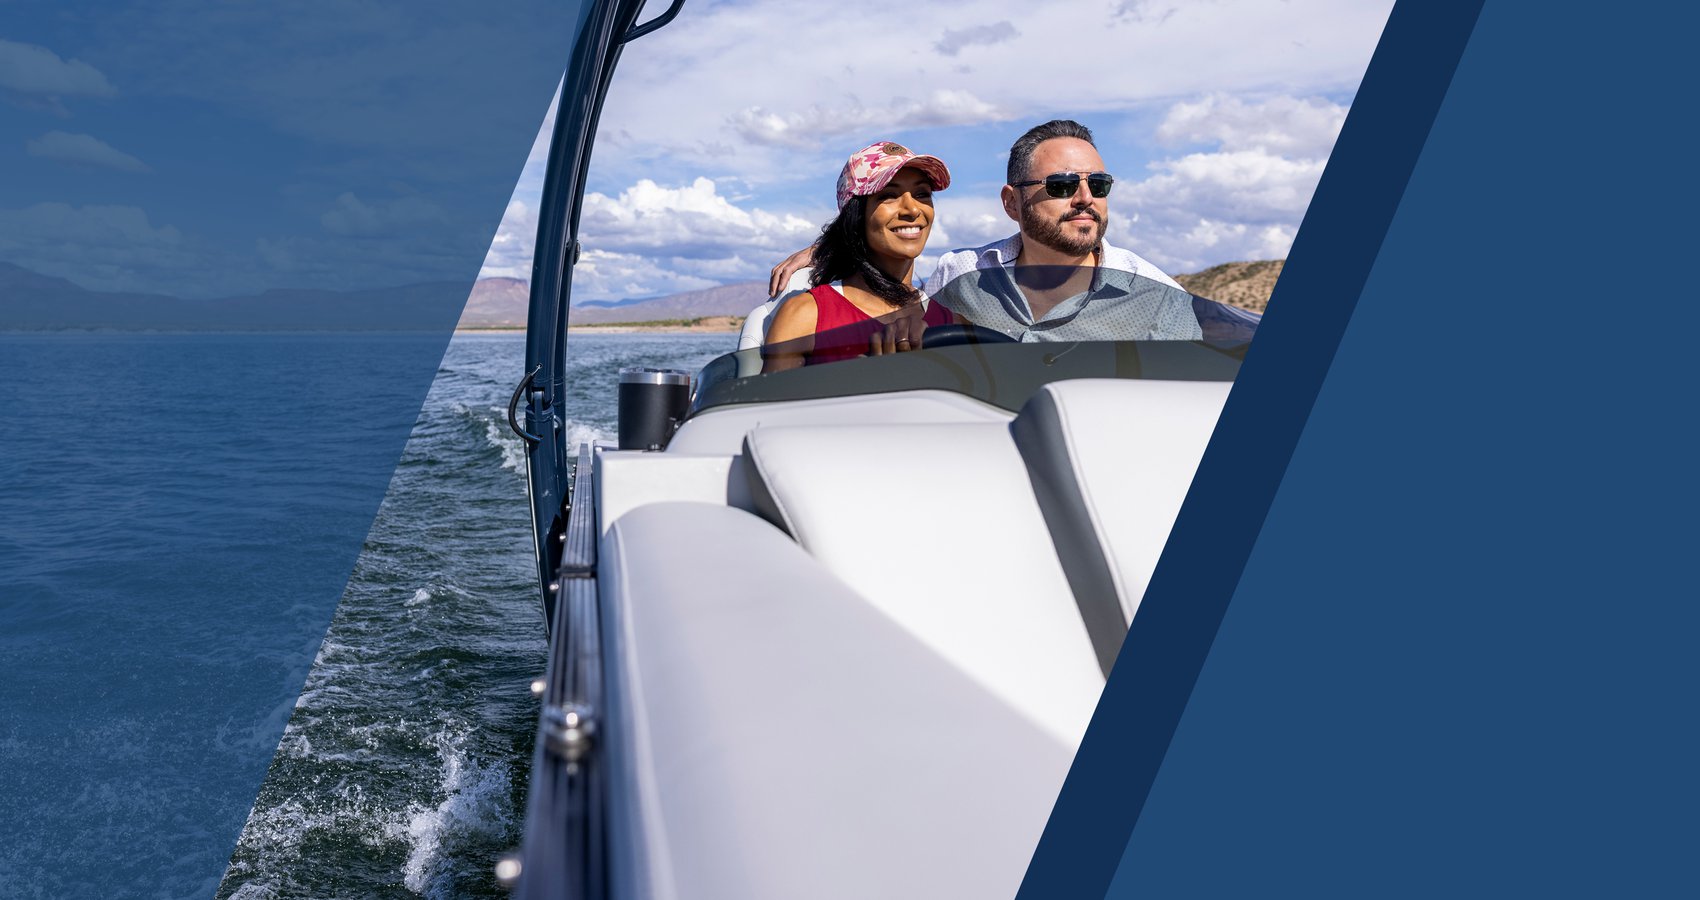 10 Steps to Follow When Taking a Boat on a Sea Trial